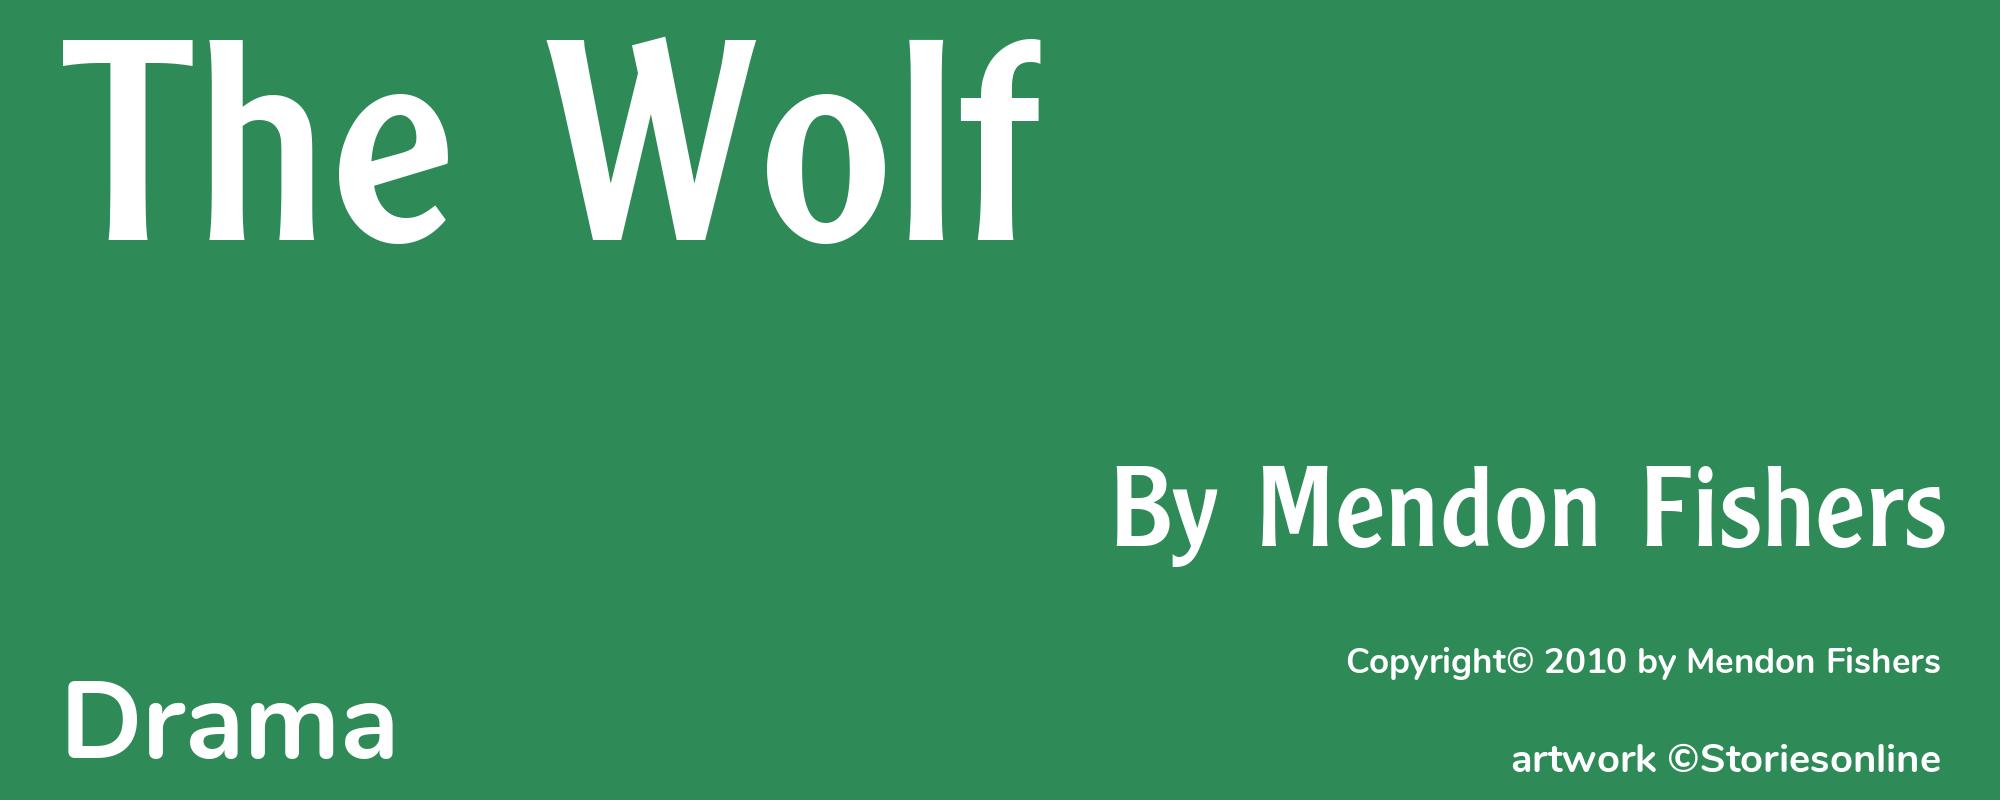 The Wolf - Cover